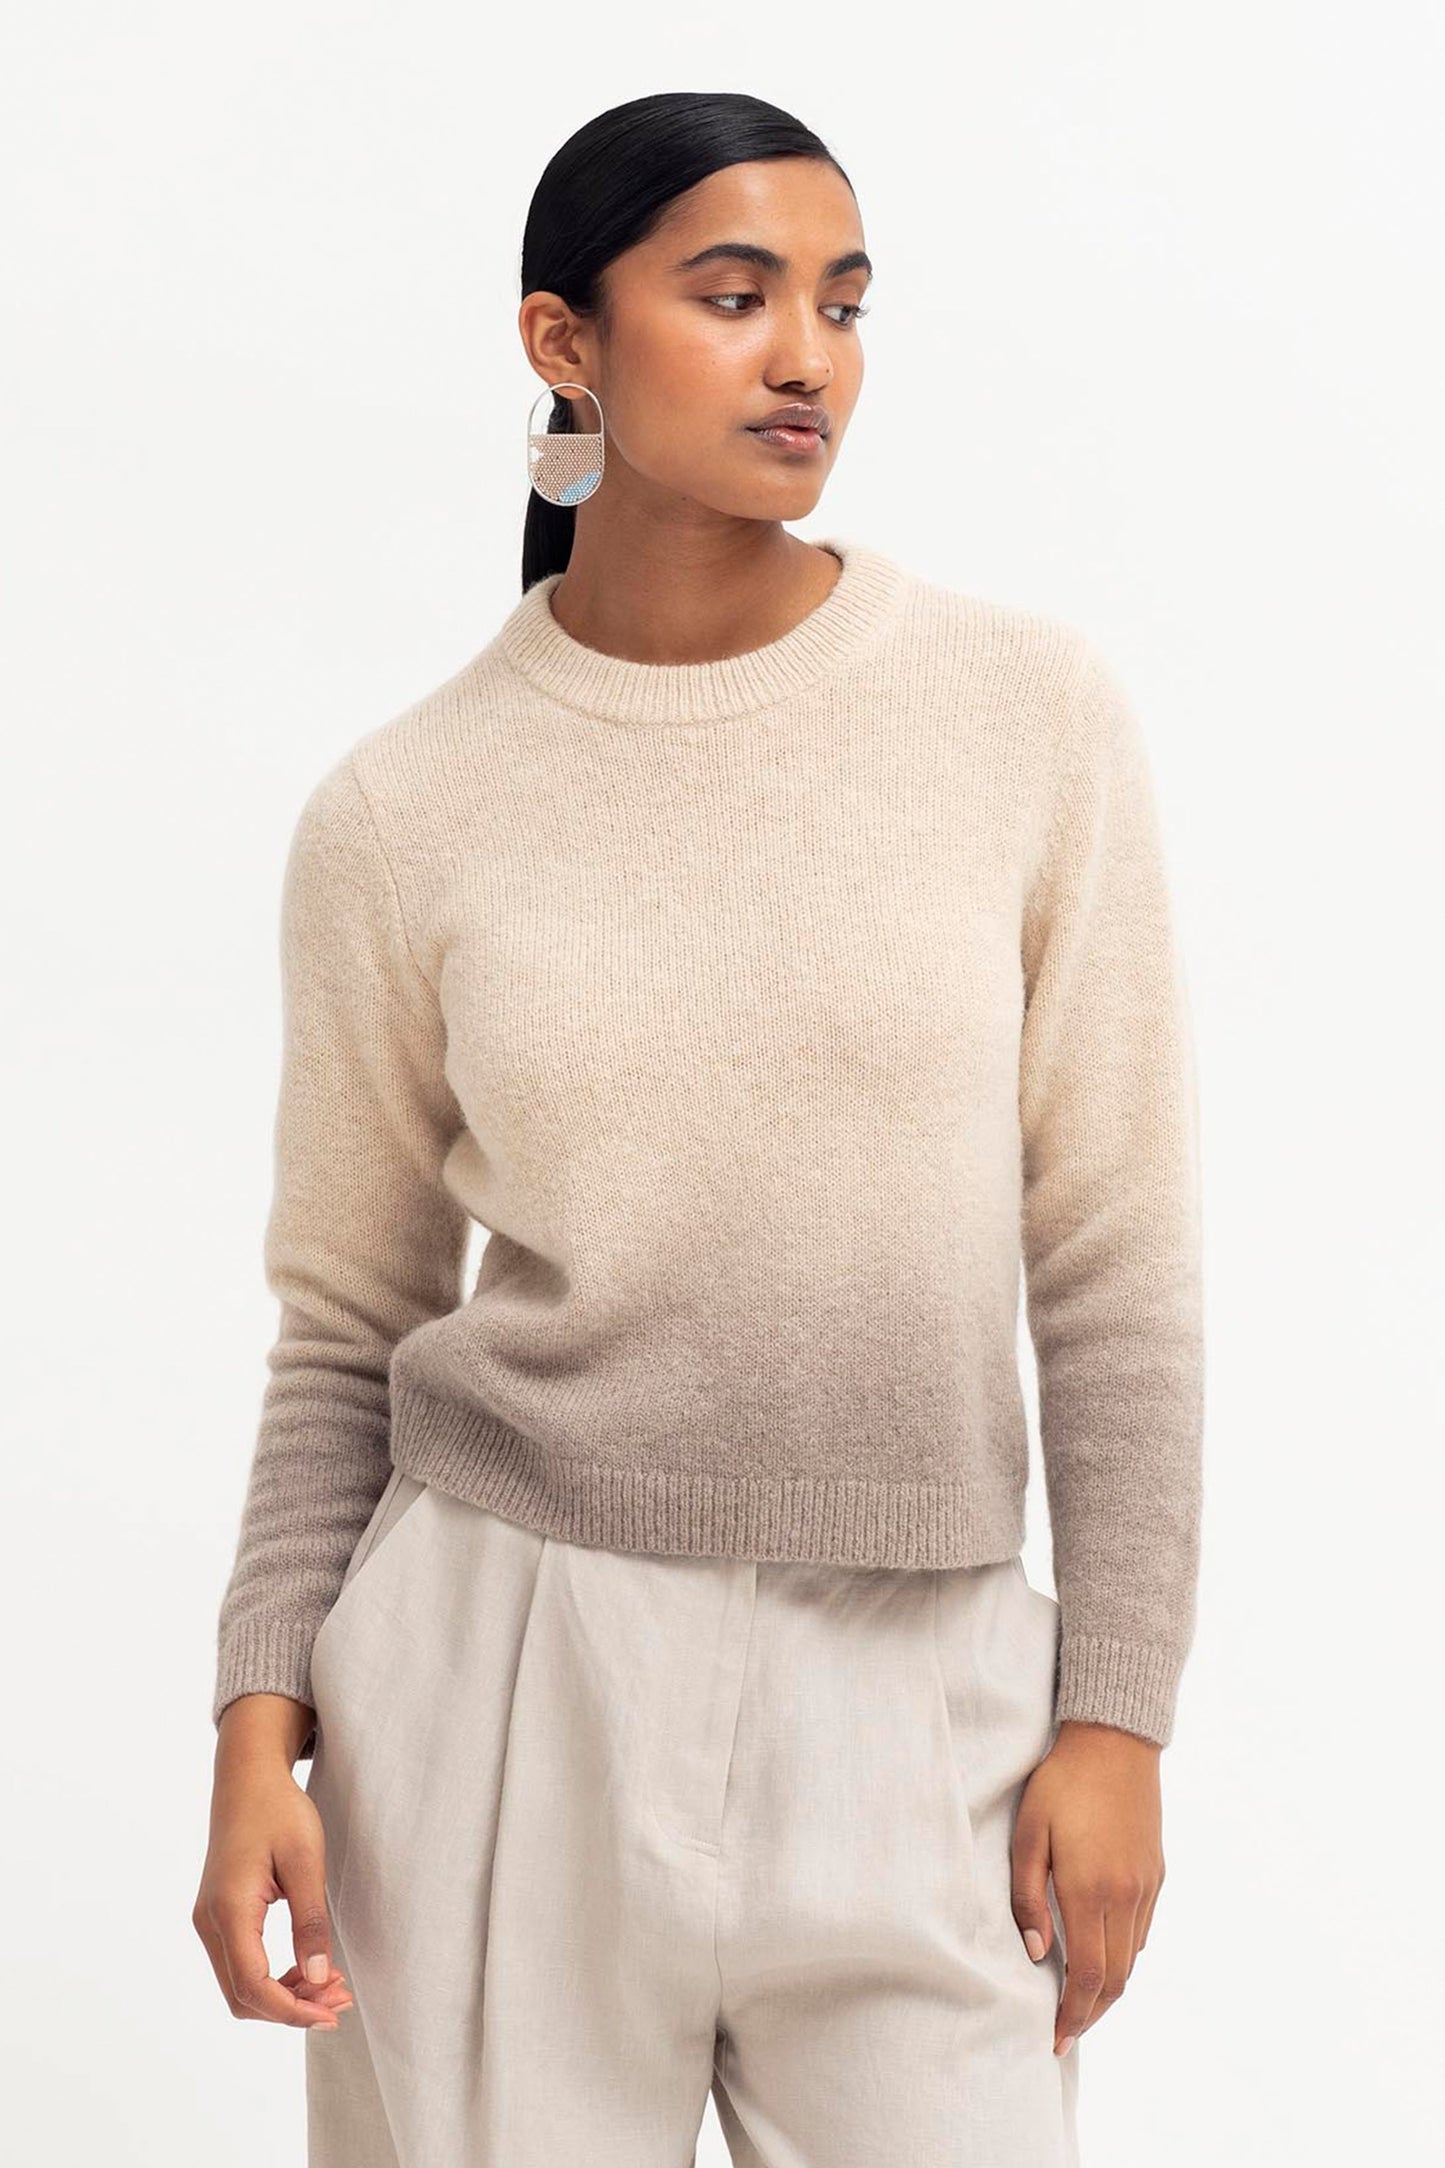 Ombre Crew Neck Dip Tied Knit Sweater Model Model Front | ECRU BROWN OMBRE